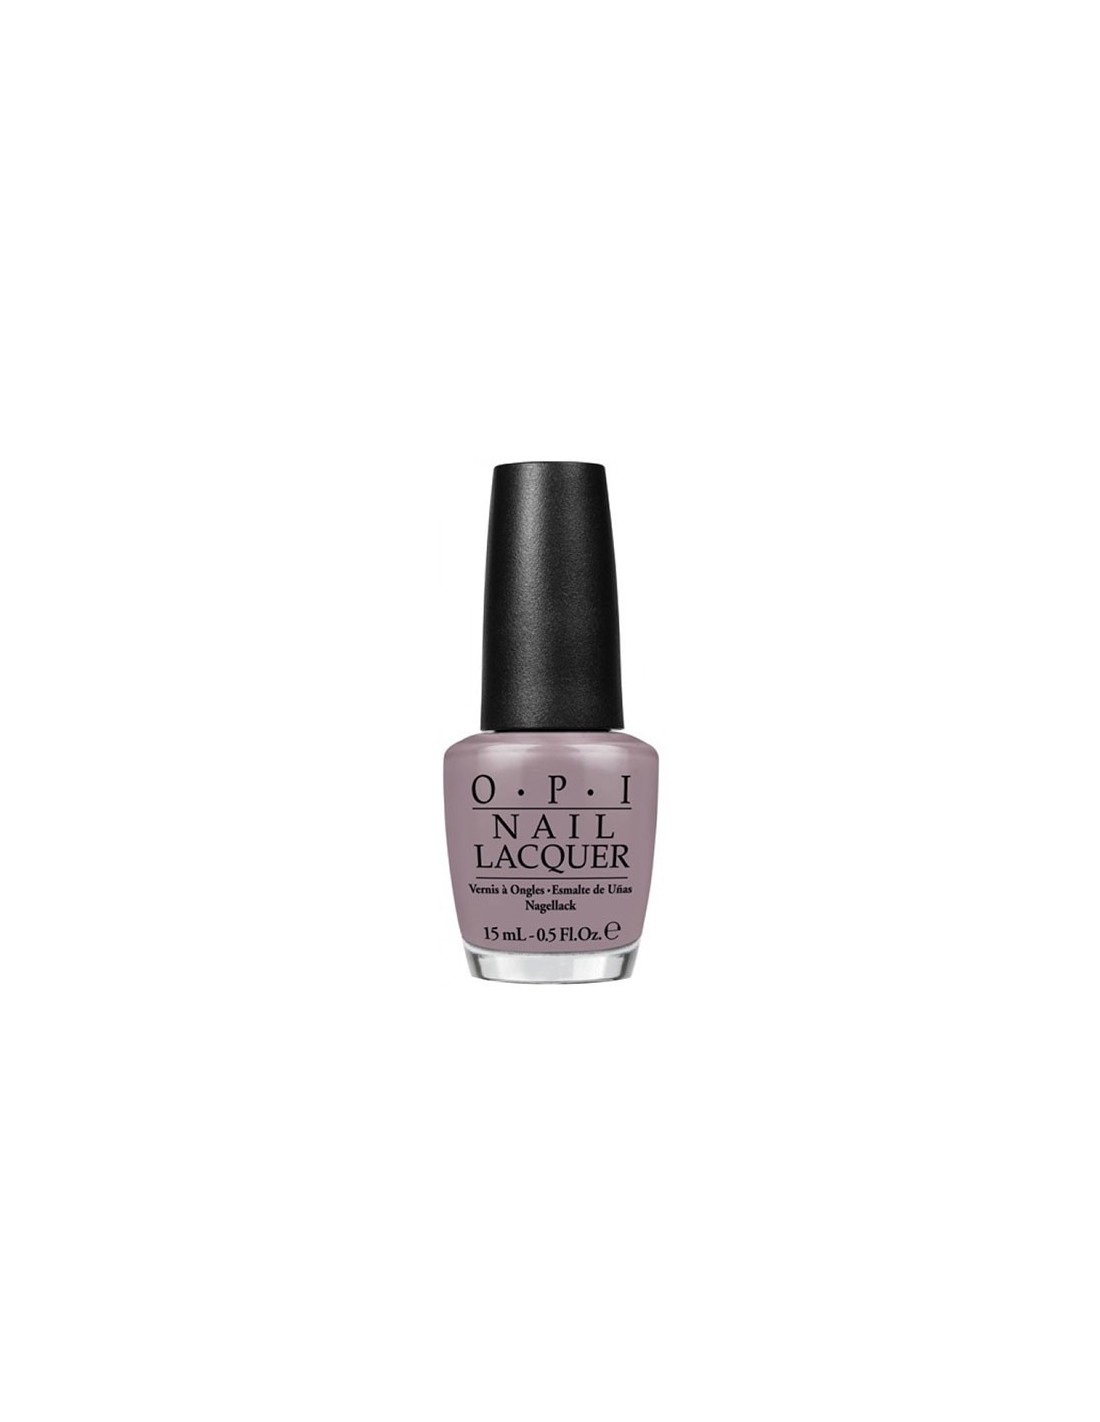 Warm Taupe Gel Nail Polish By The Manicure Company